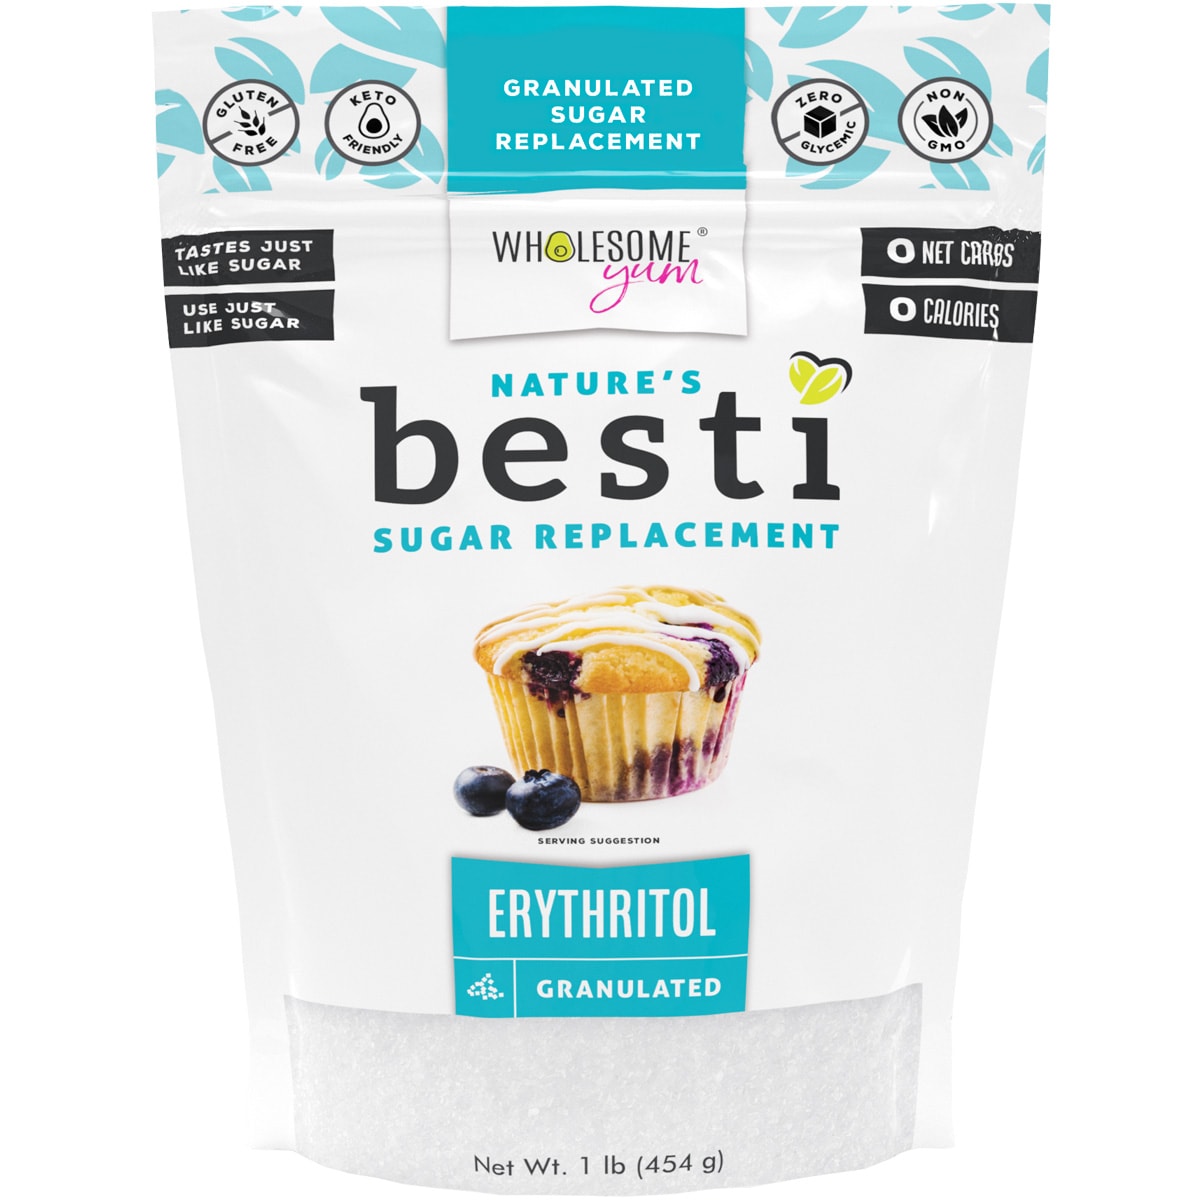 Wholesome Yum Granulated Erythritol Sweetener